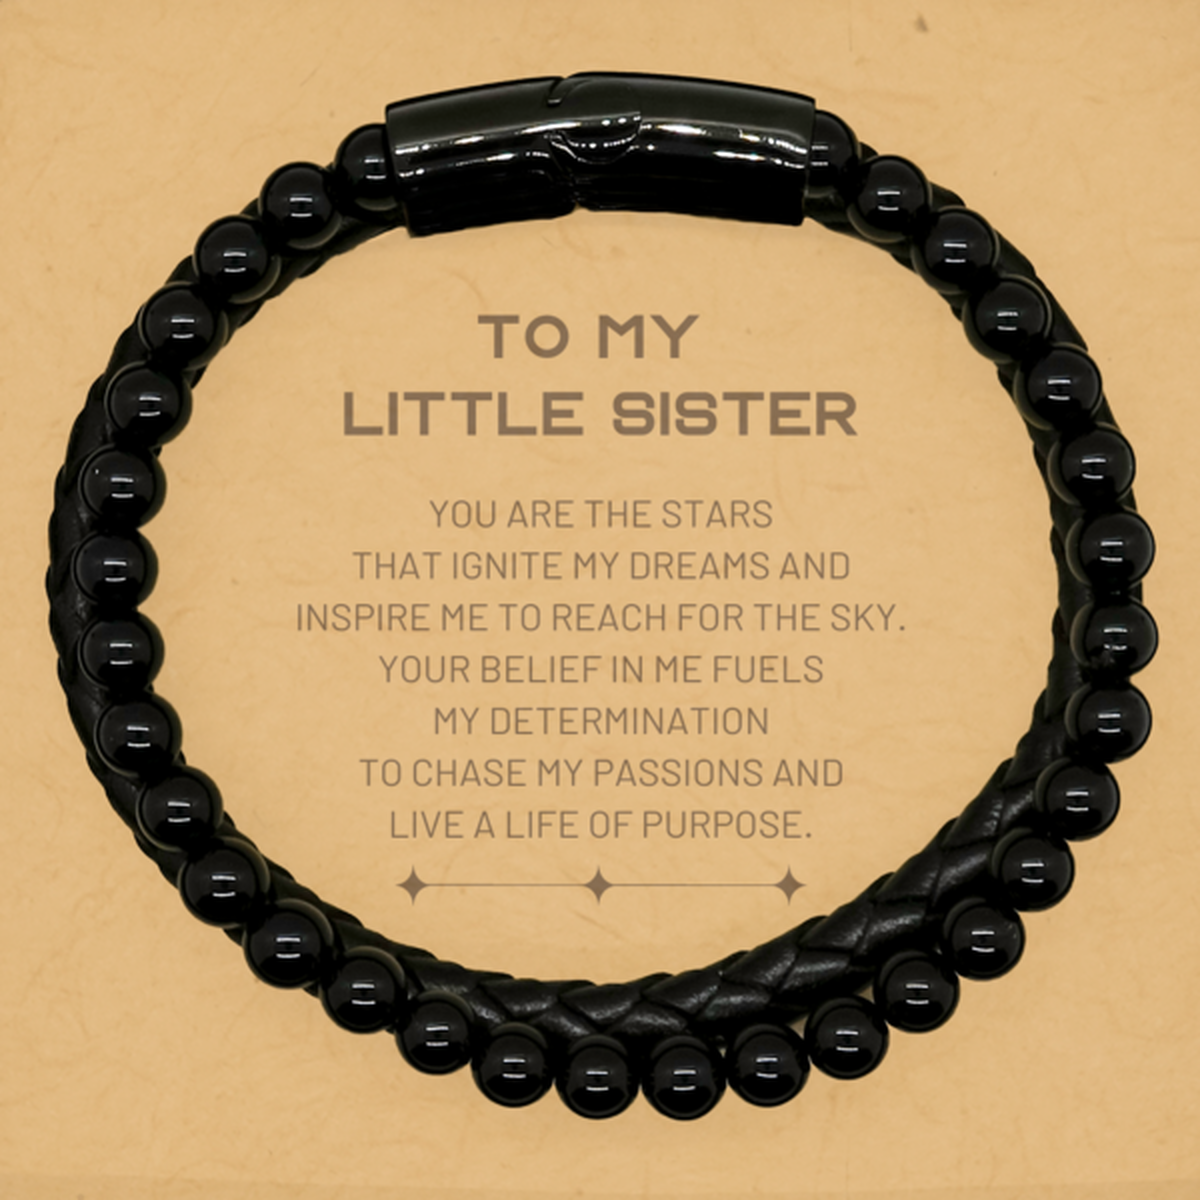 To My Little Sister Stone Leather Bracelets, You are the stars that ignite my dreams and inspire me to reach for the sky, Birthday Unique Gifts For Little Sister, Thank You Gifts For Little Sister